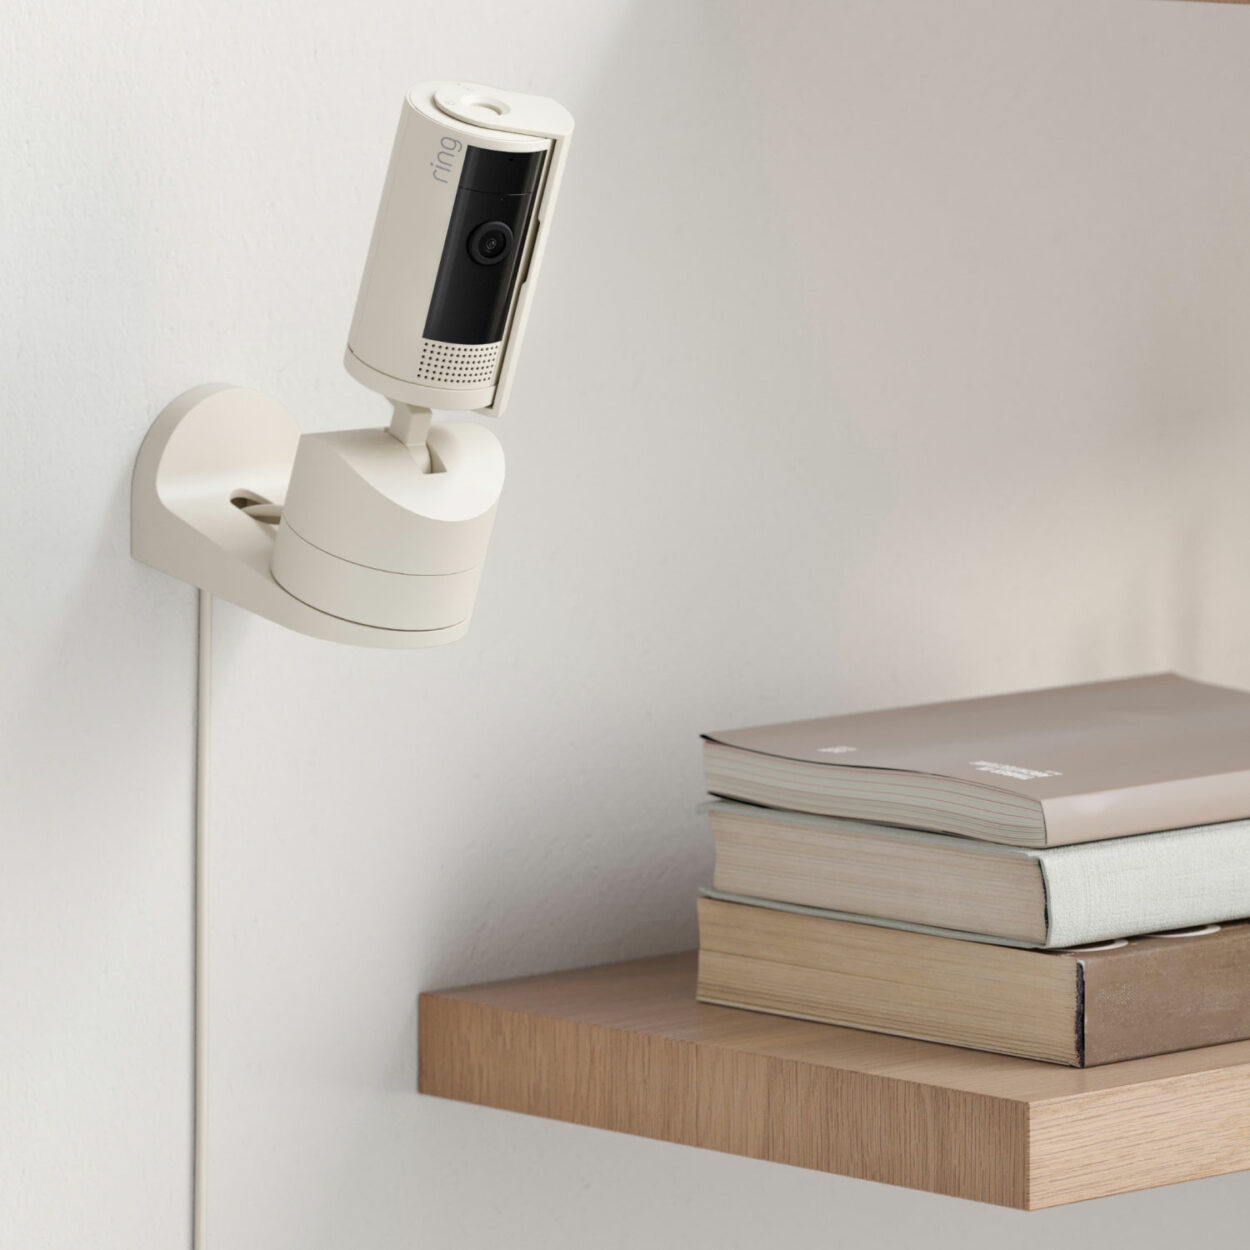 Ring Pan-Tilt Indoor Camera on the wall